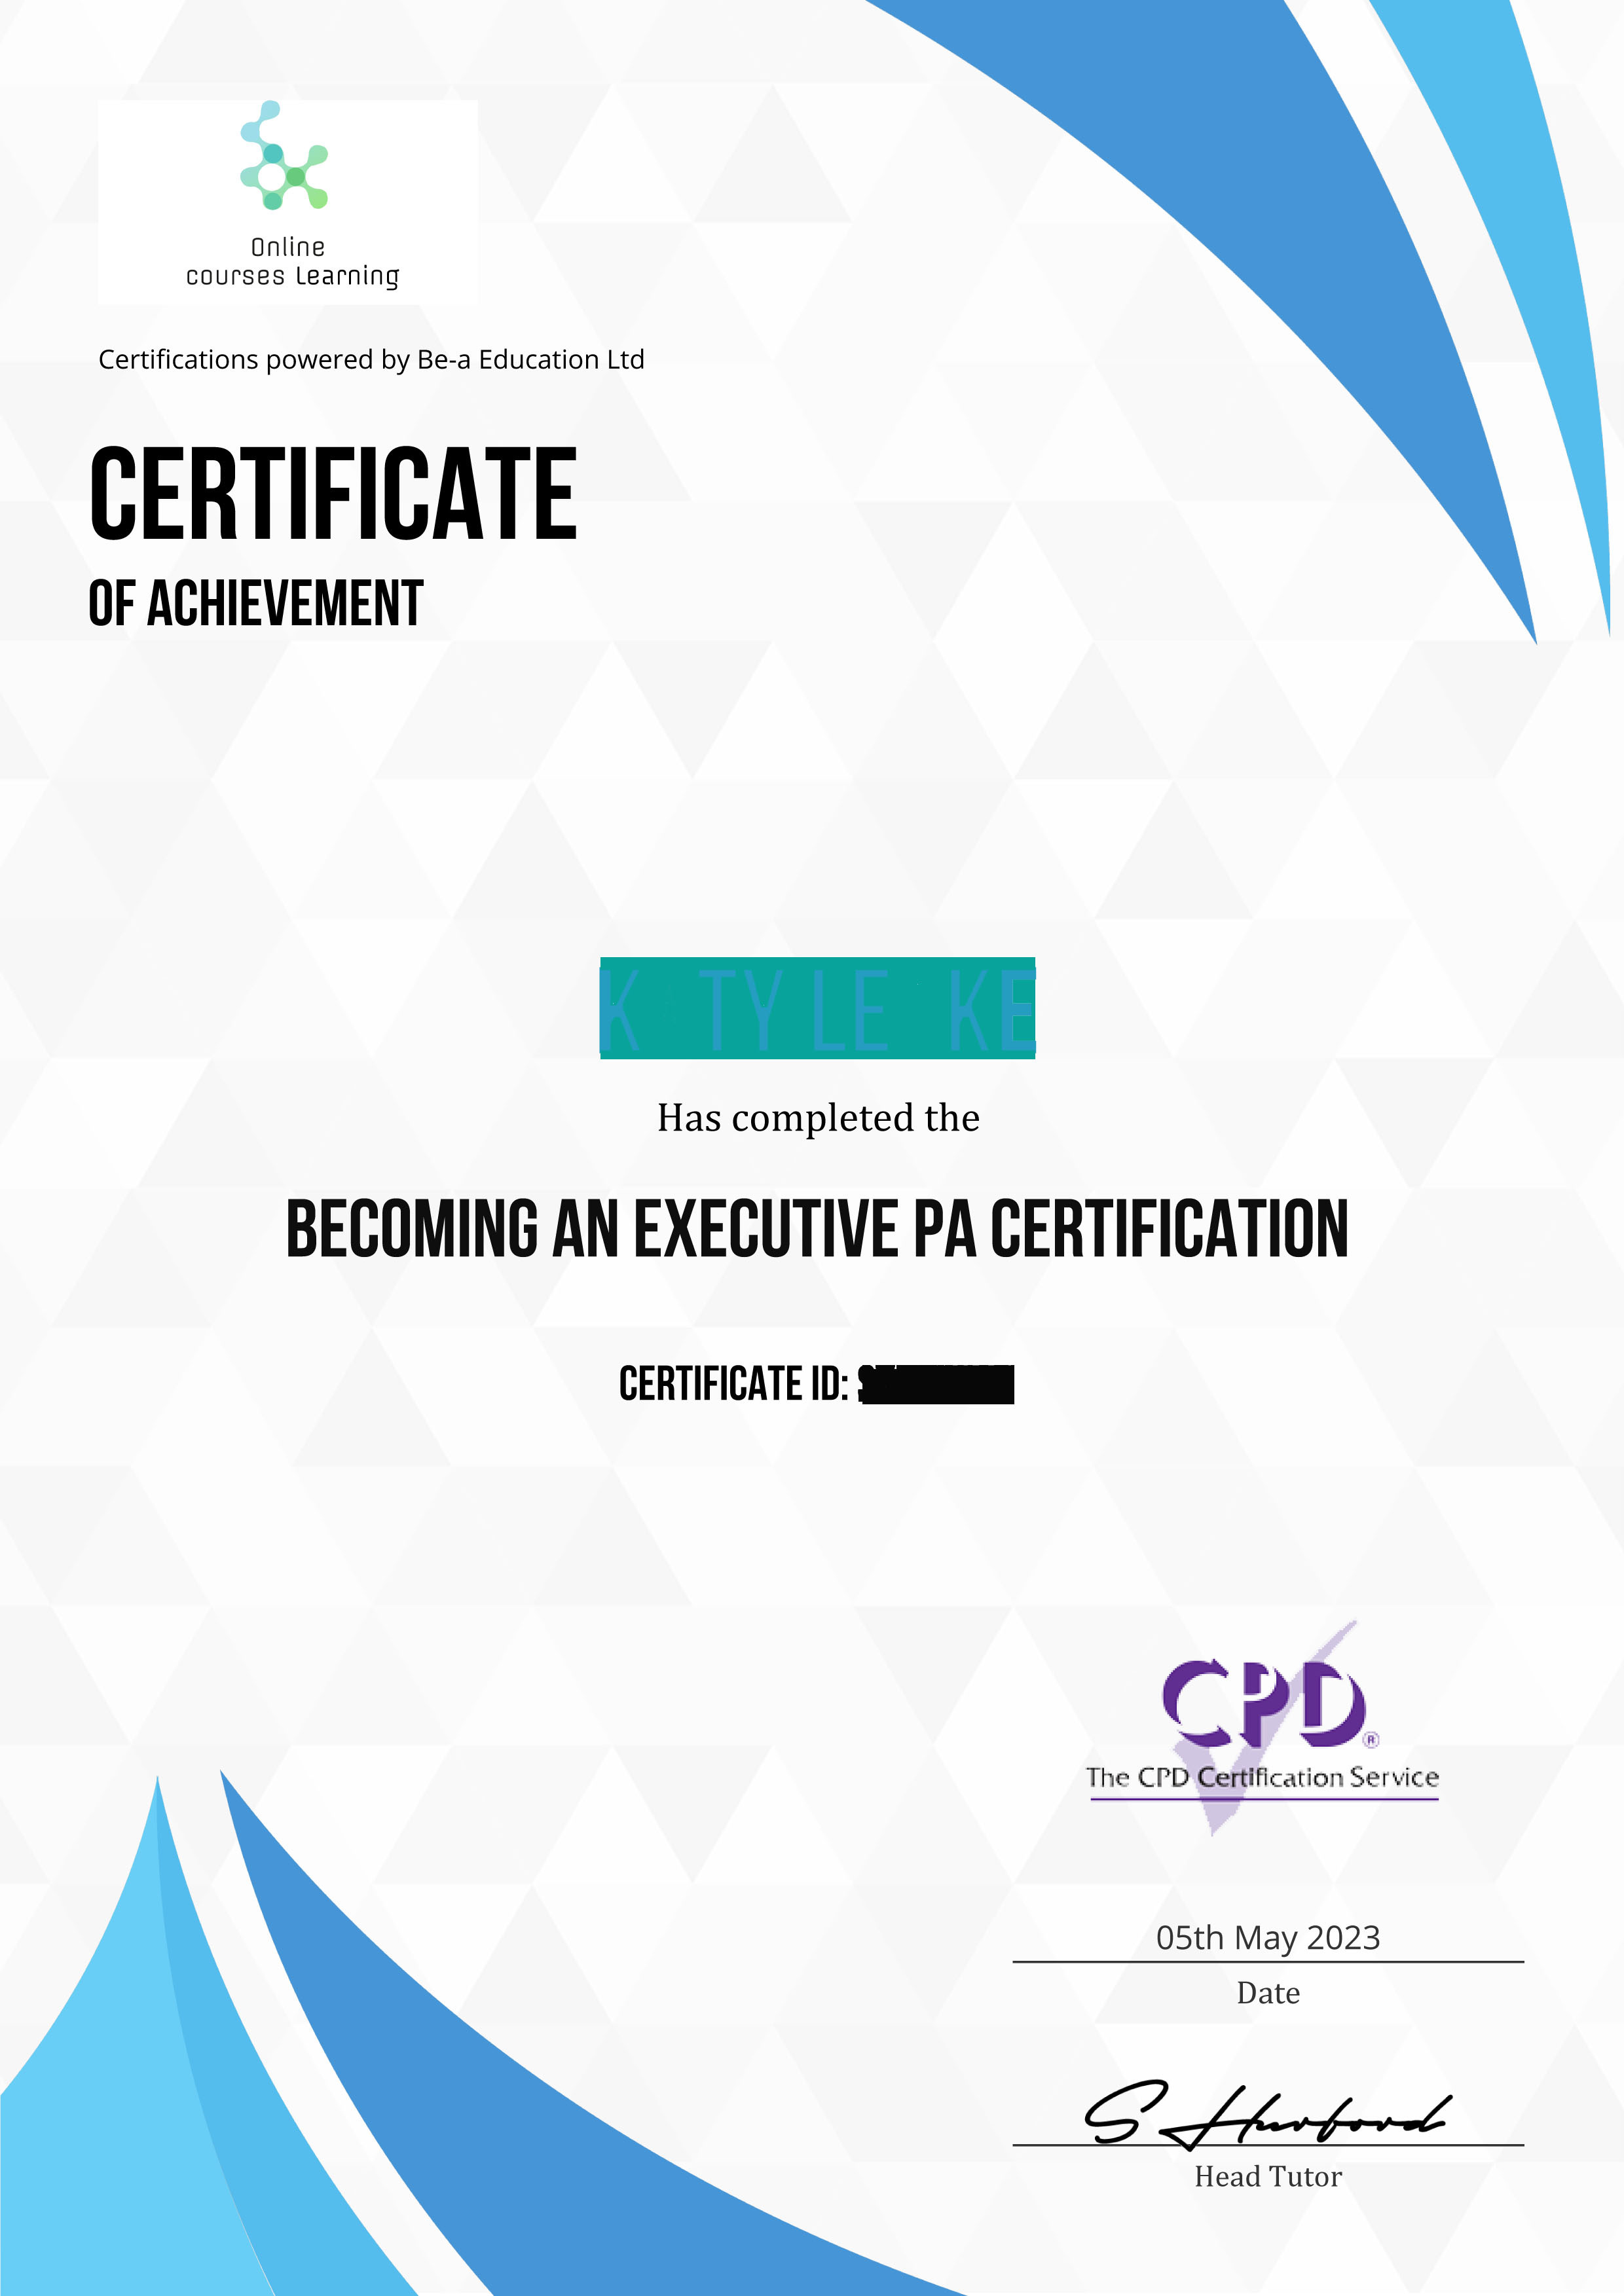 Online Courses Learning sample certificate